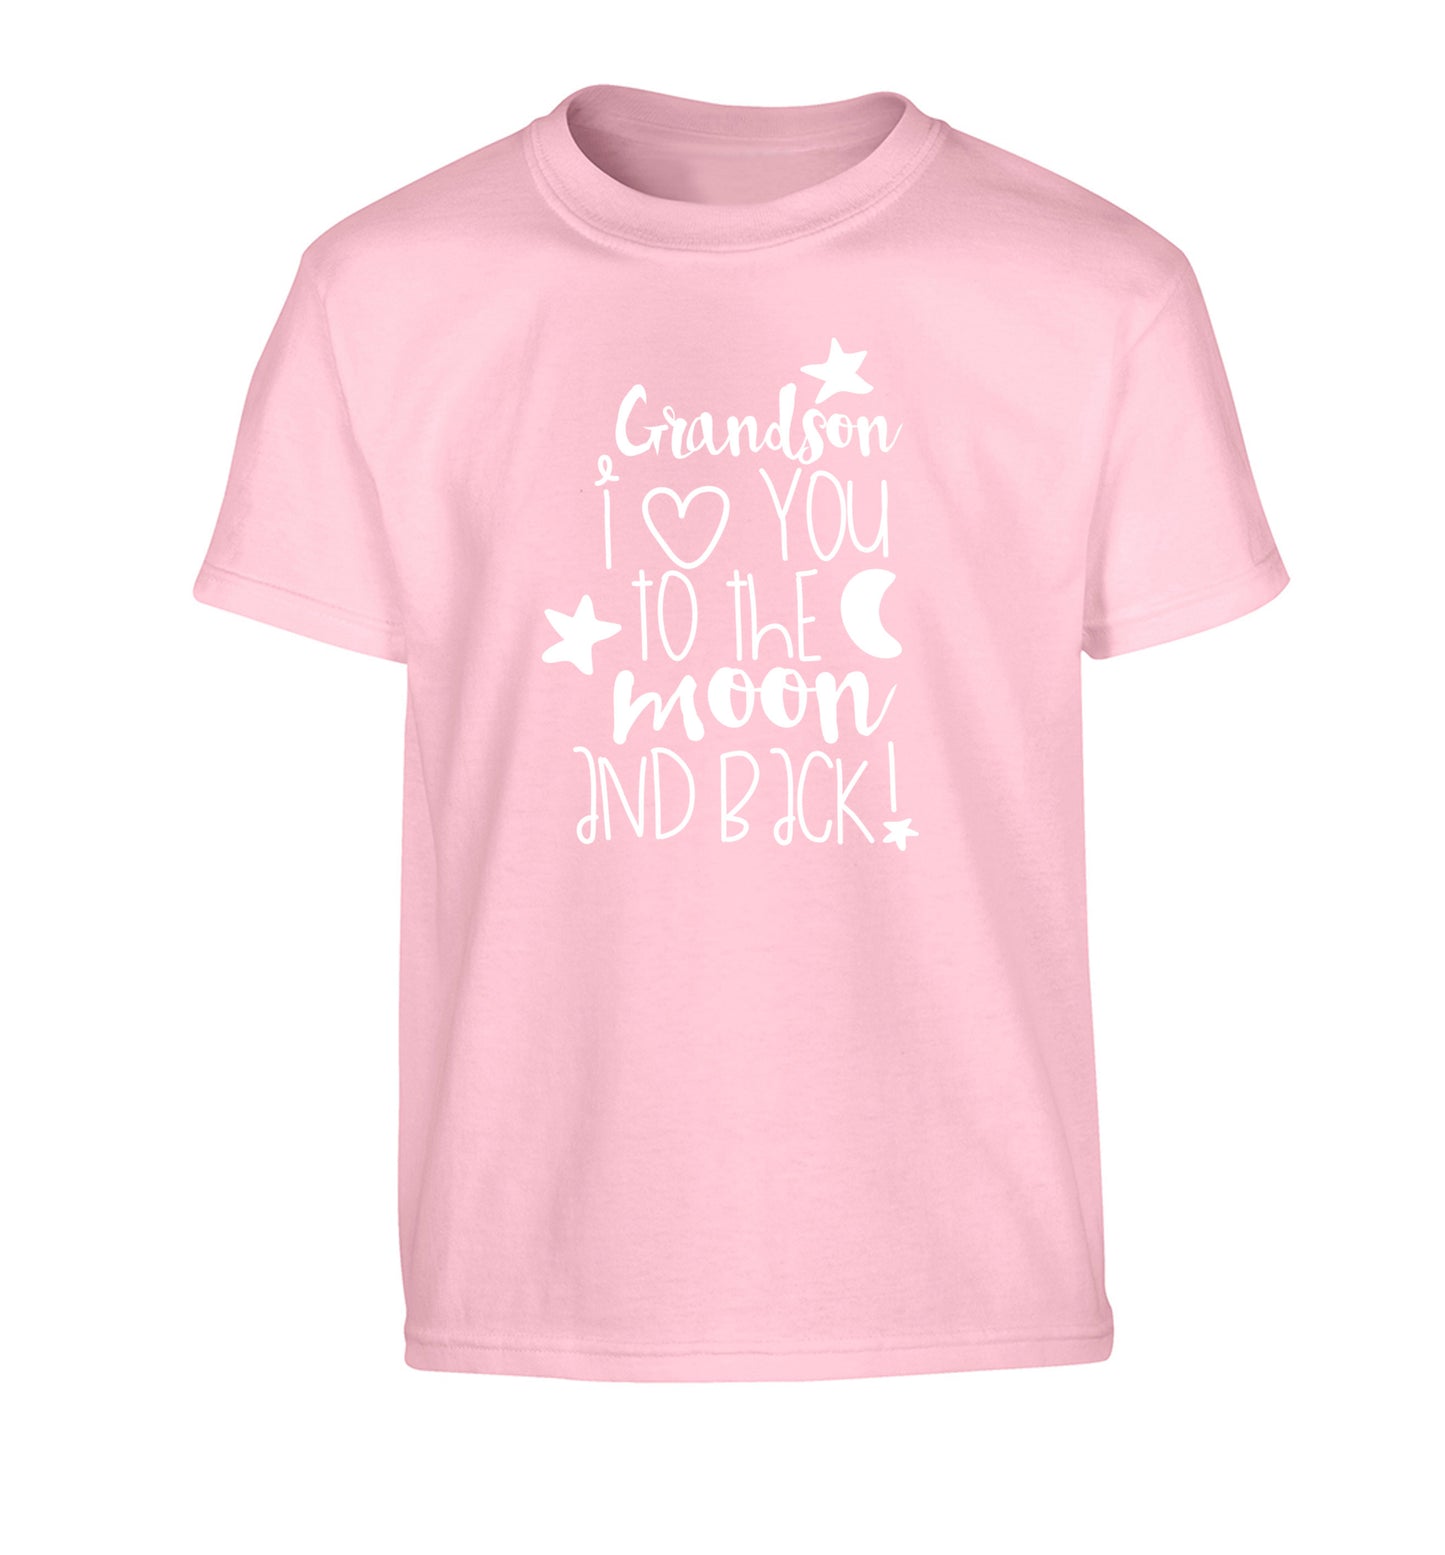 Grandson I love you to the moon and back Children's light pink Tshirt 12-14 Years